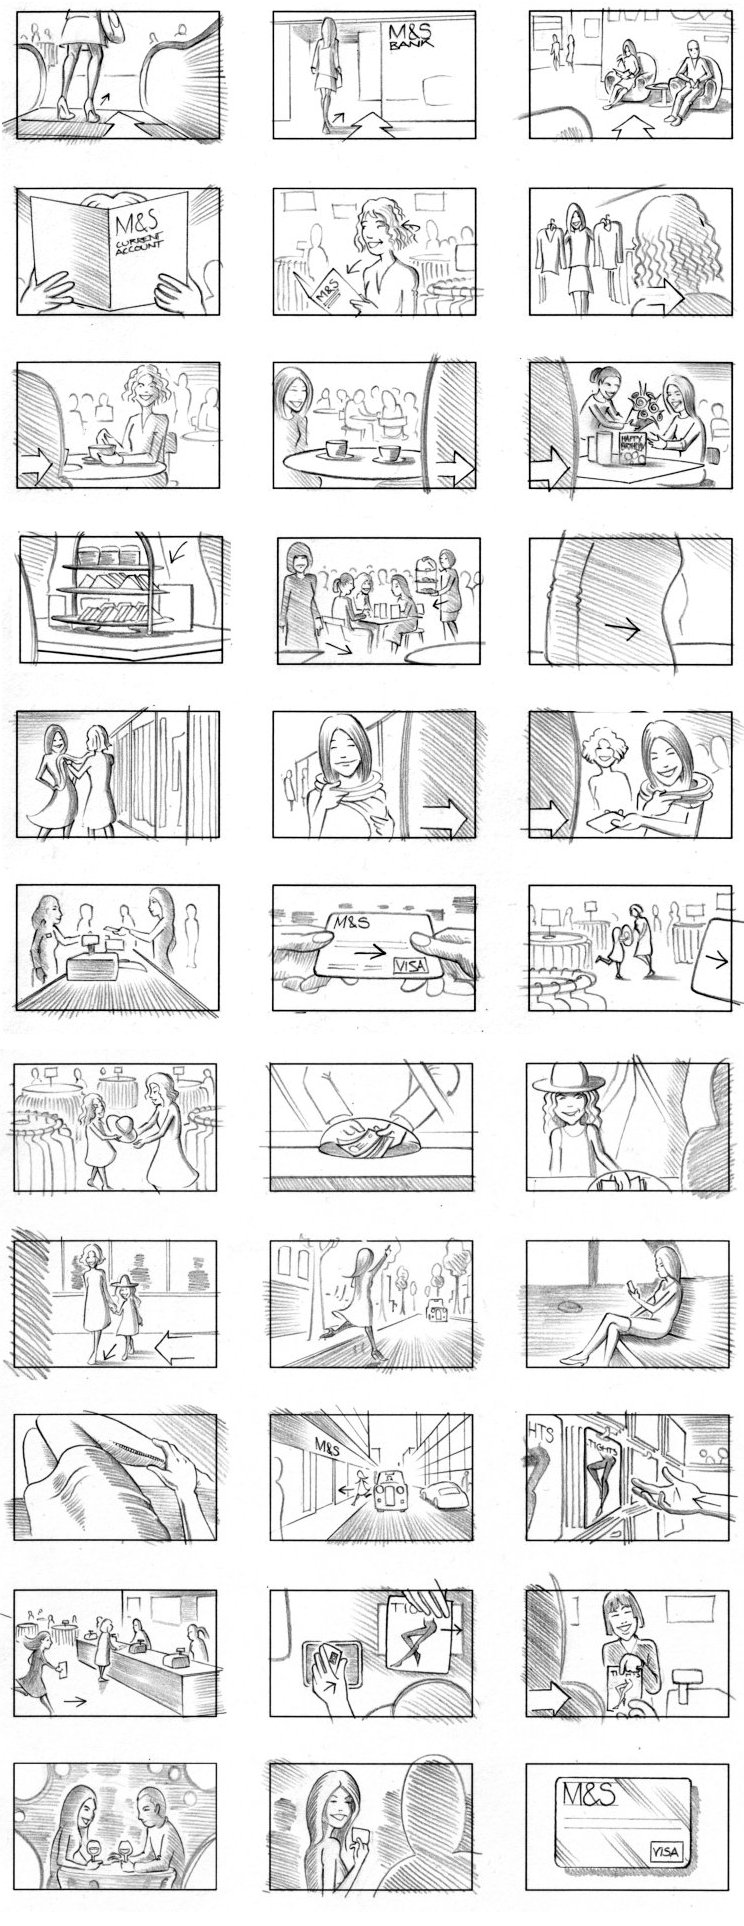 M&S STORYBOARD BY ANDY SPARROW